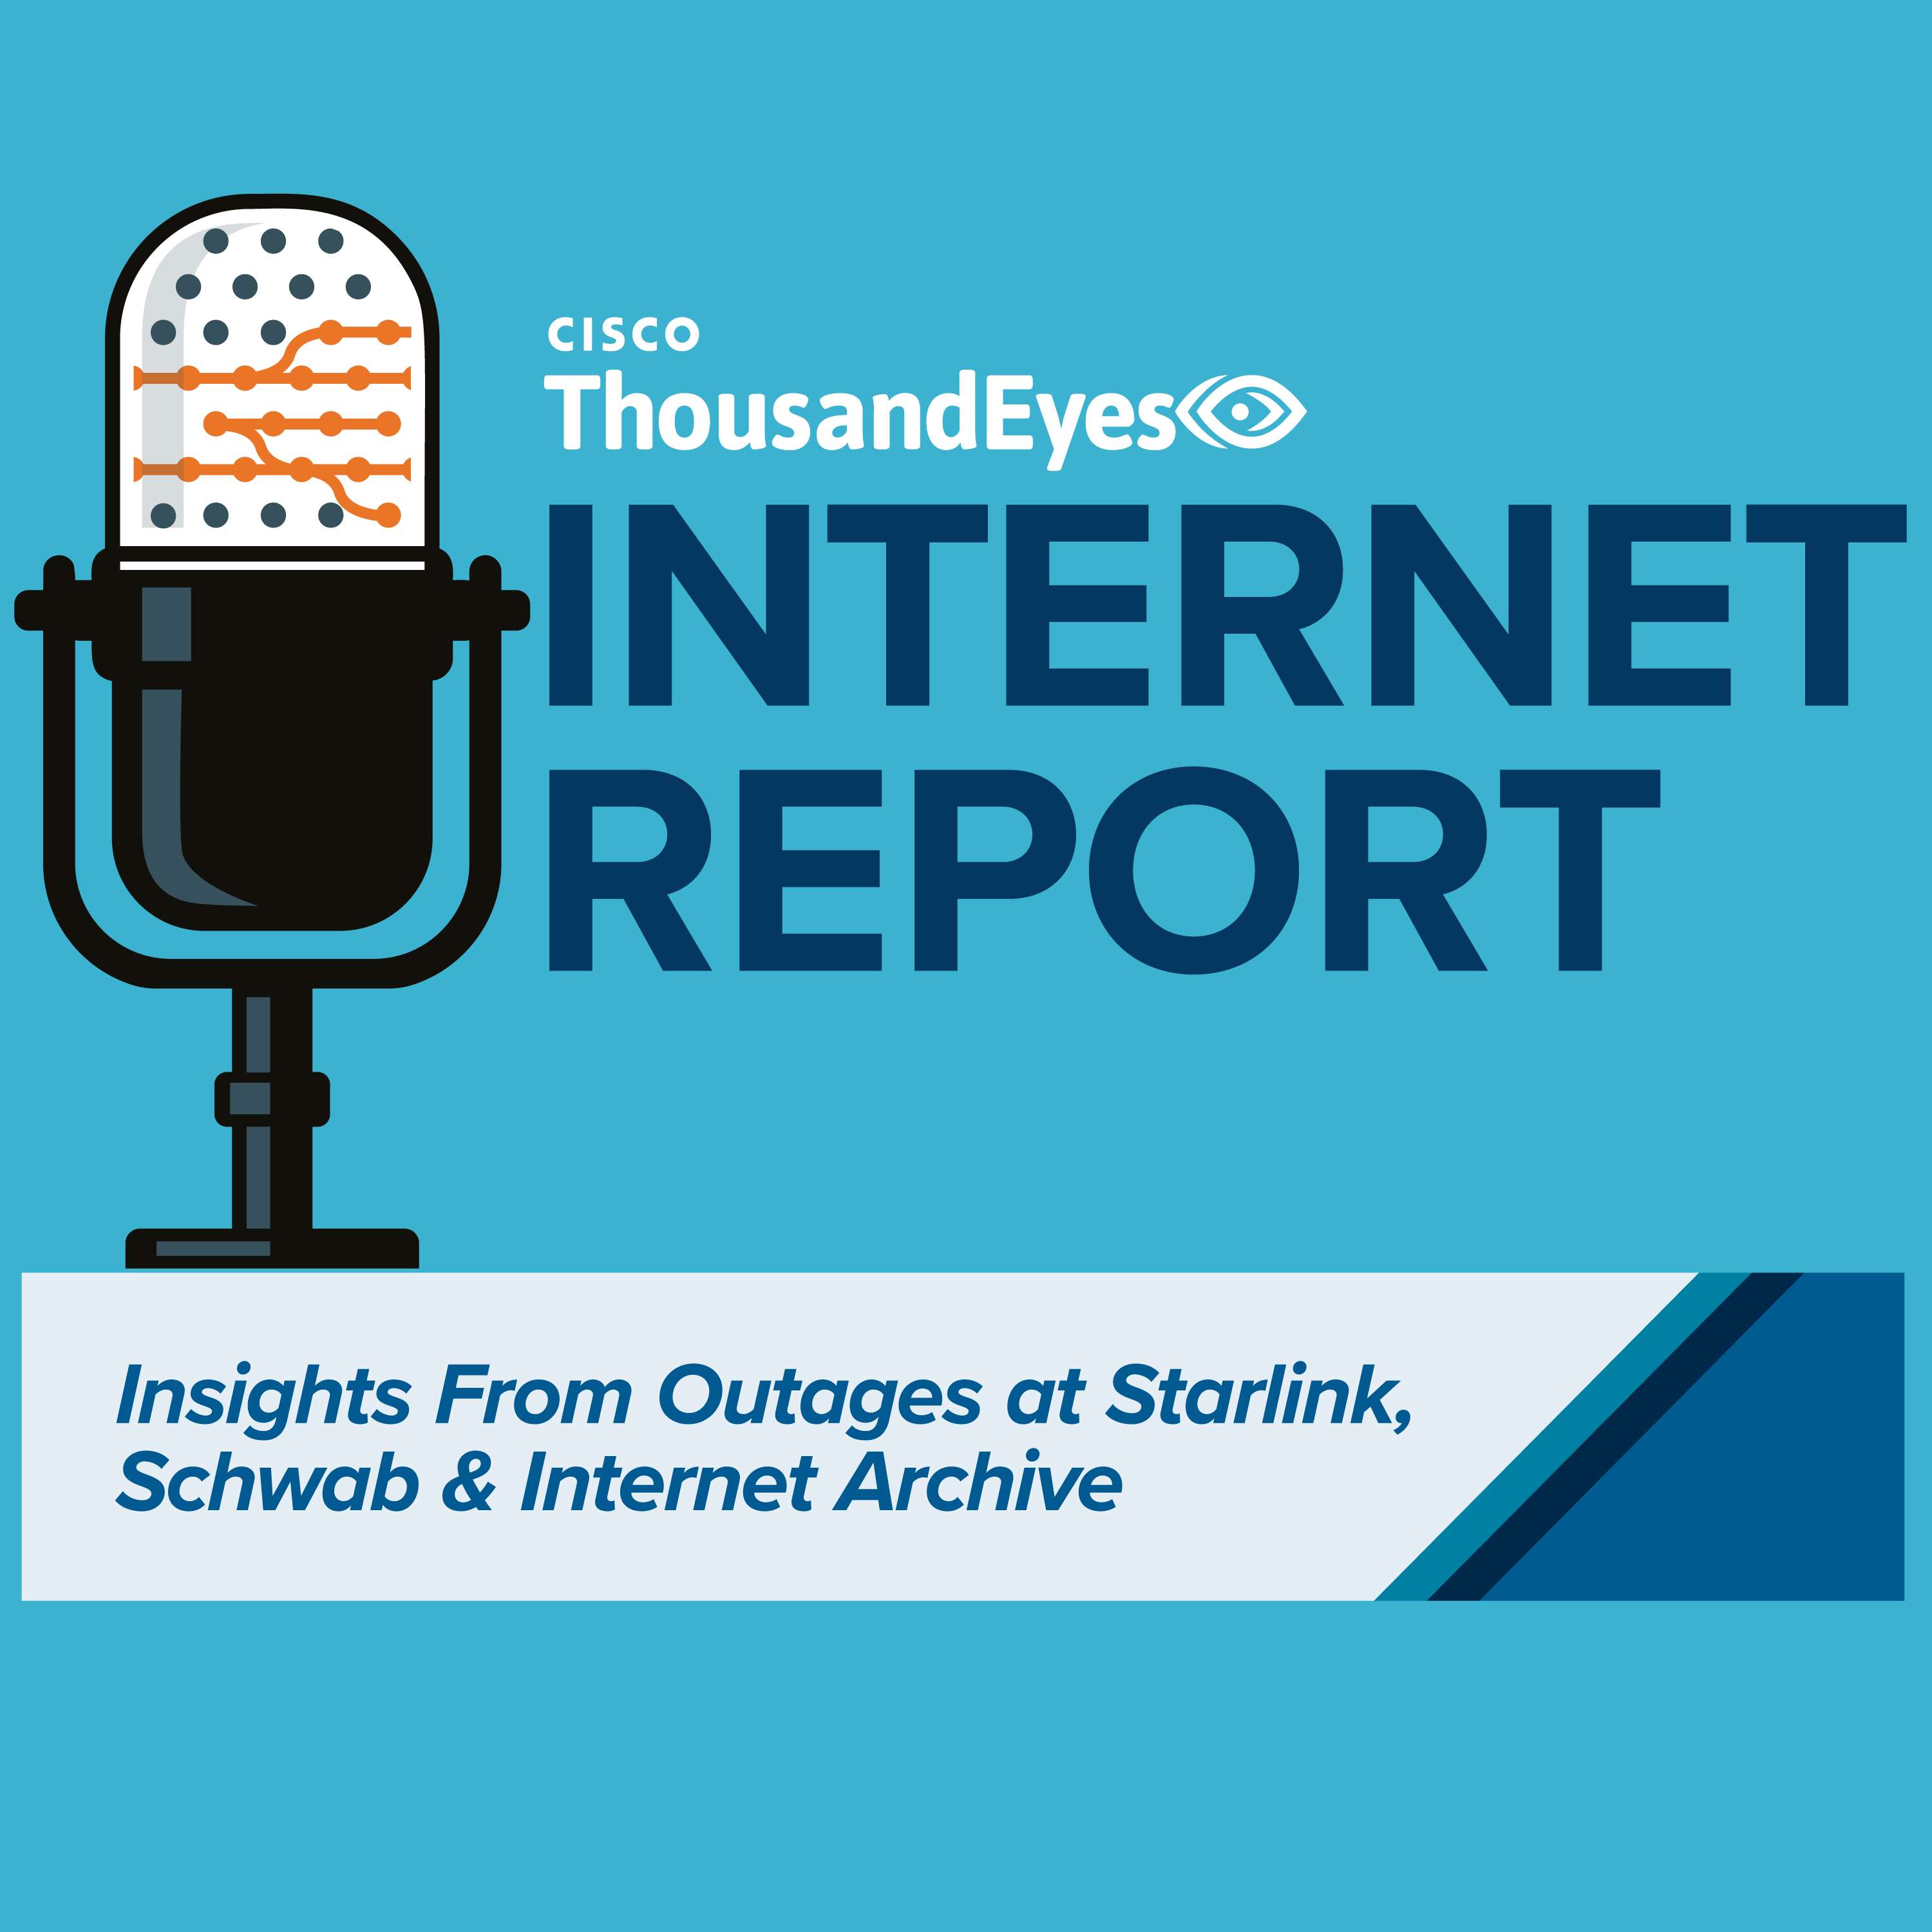 Insights From Outages at Starlink, Schwab & Internet Archive